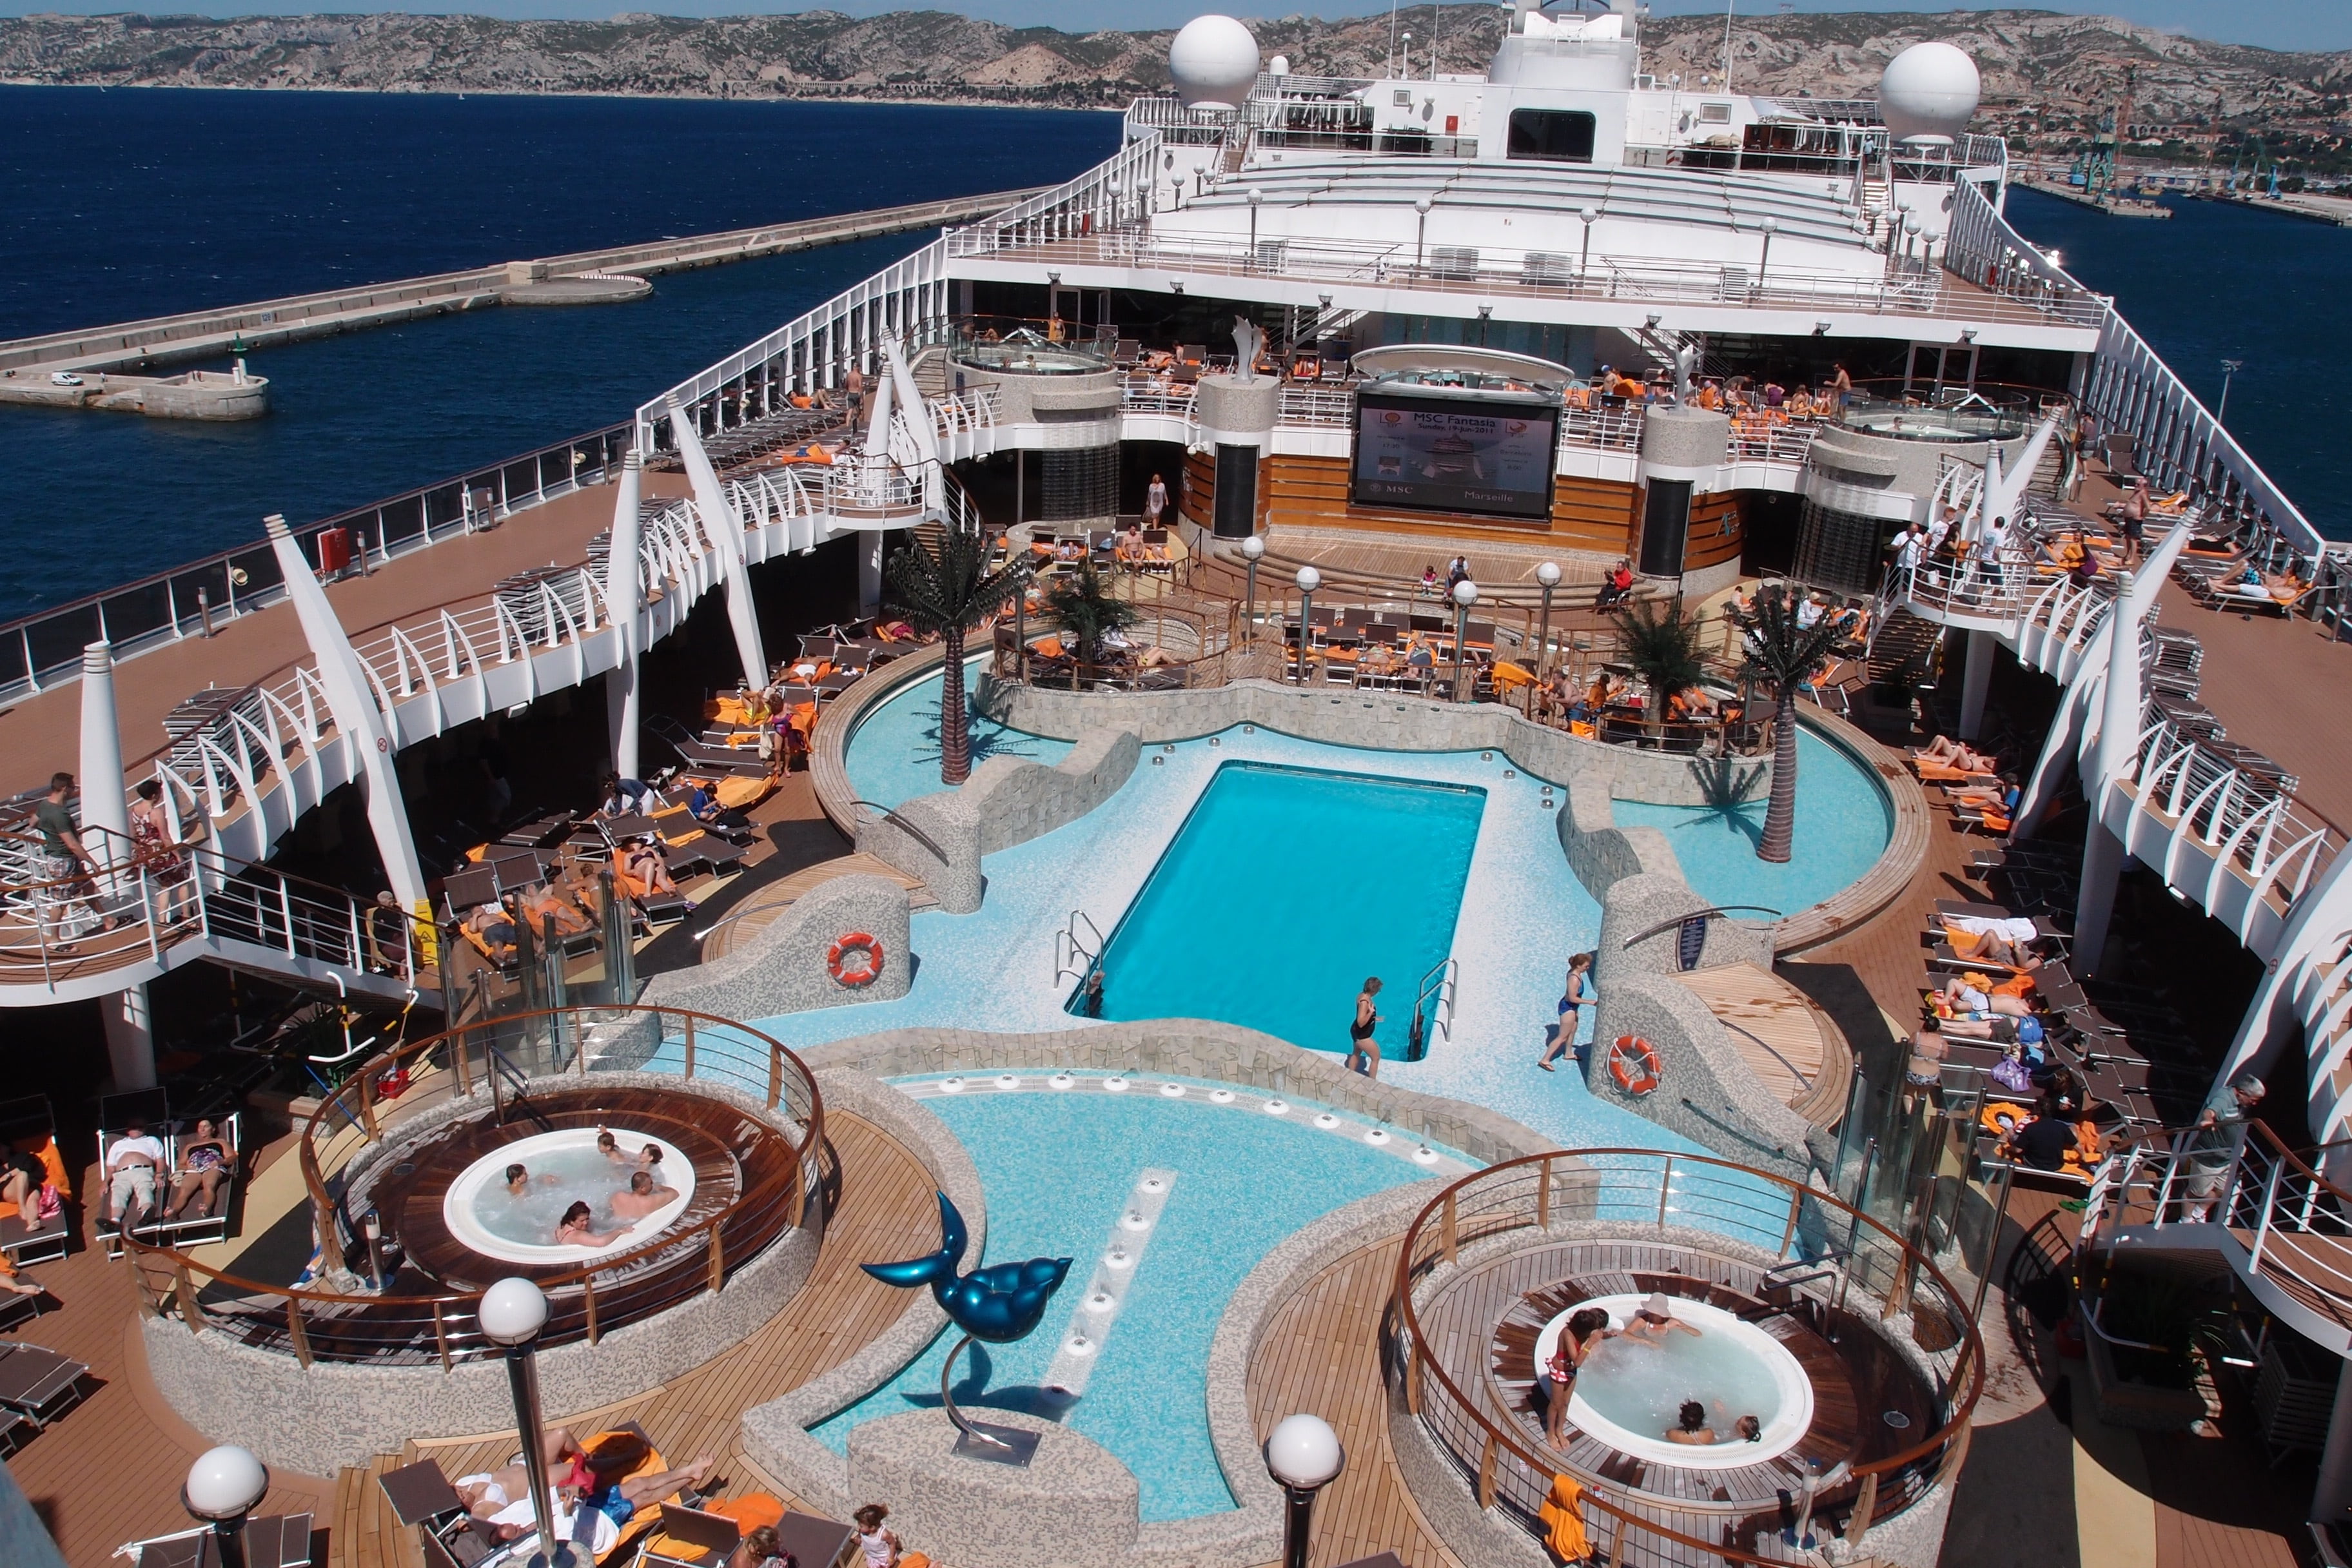 people on cruise ship with swimming pool during daytime, luxury